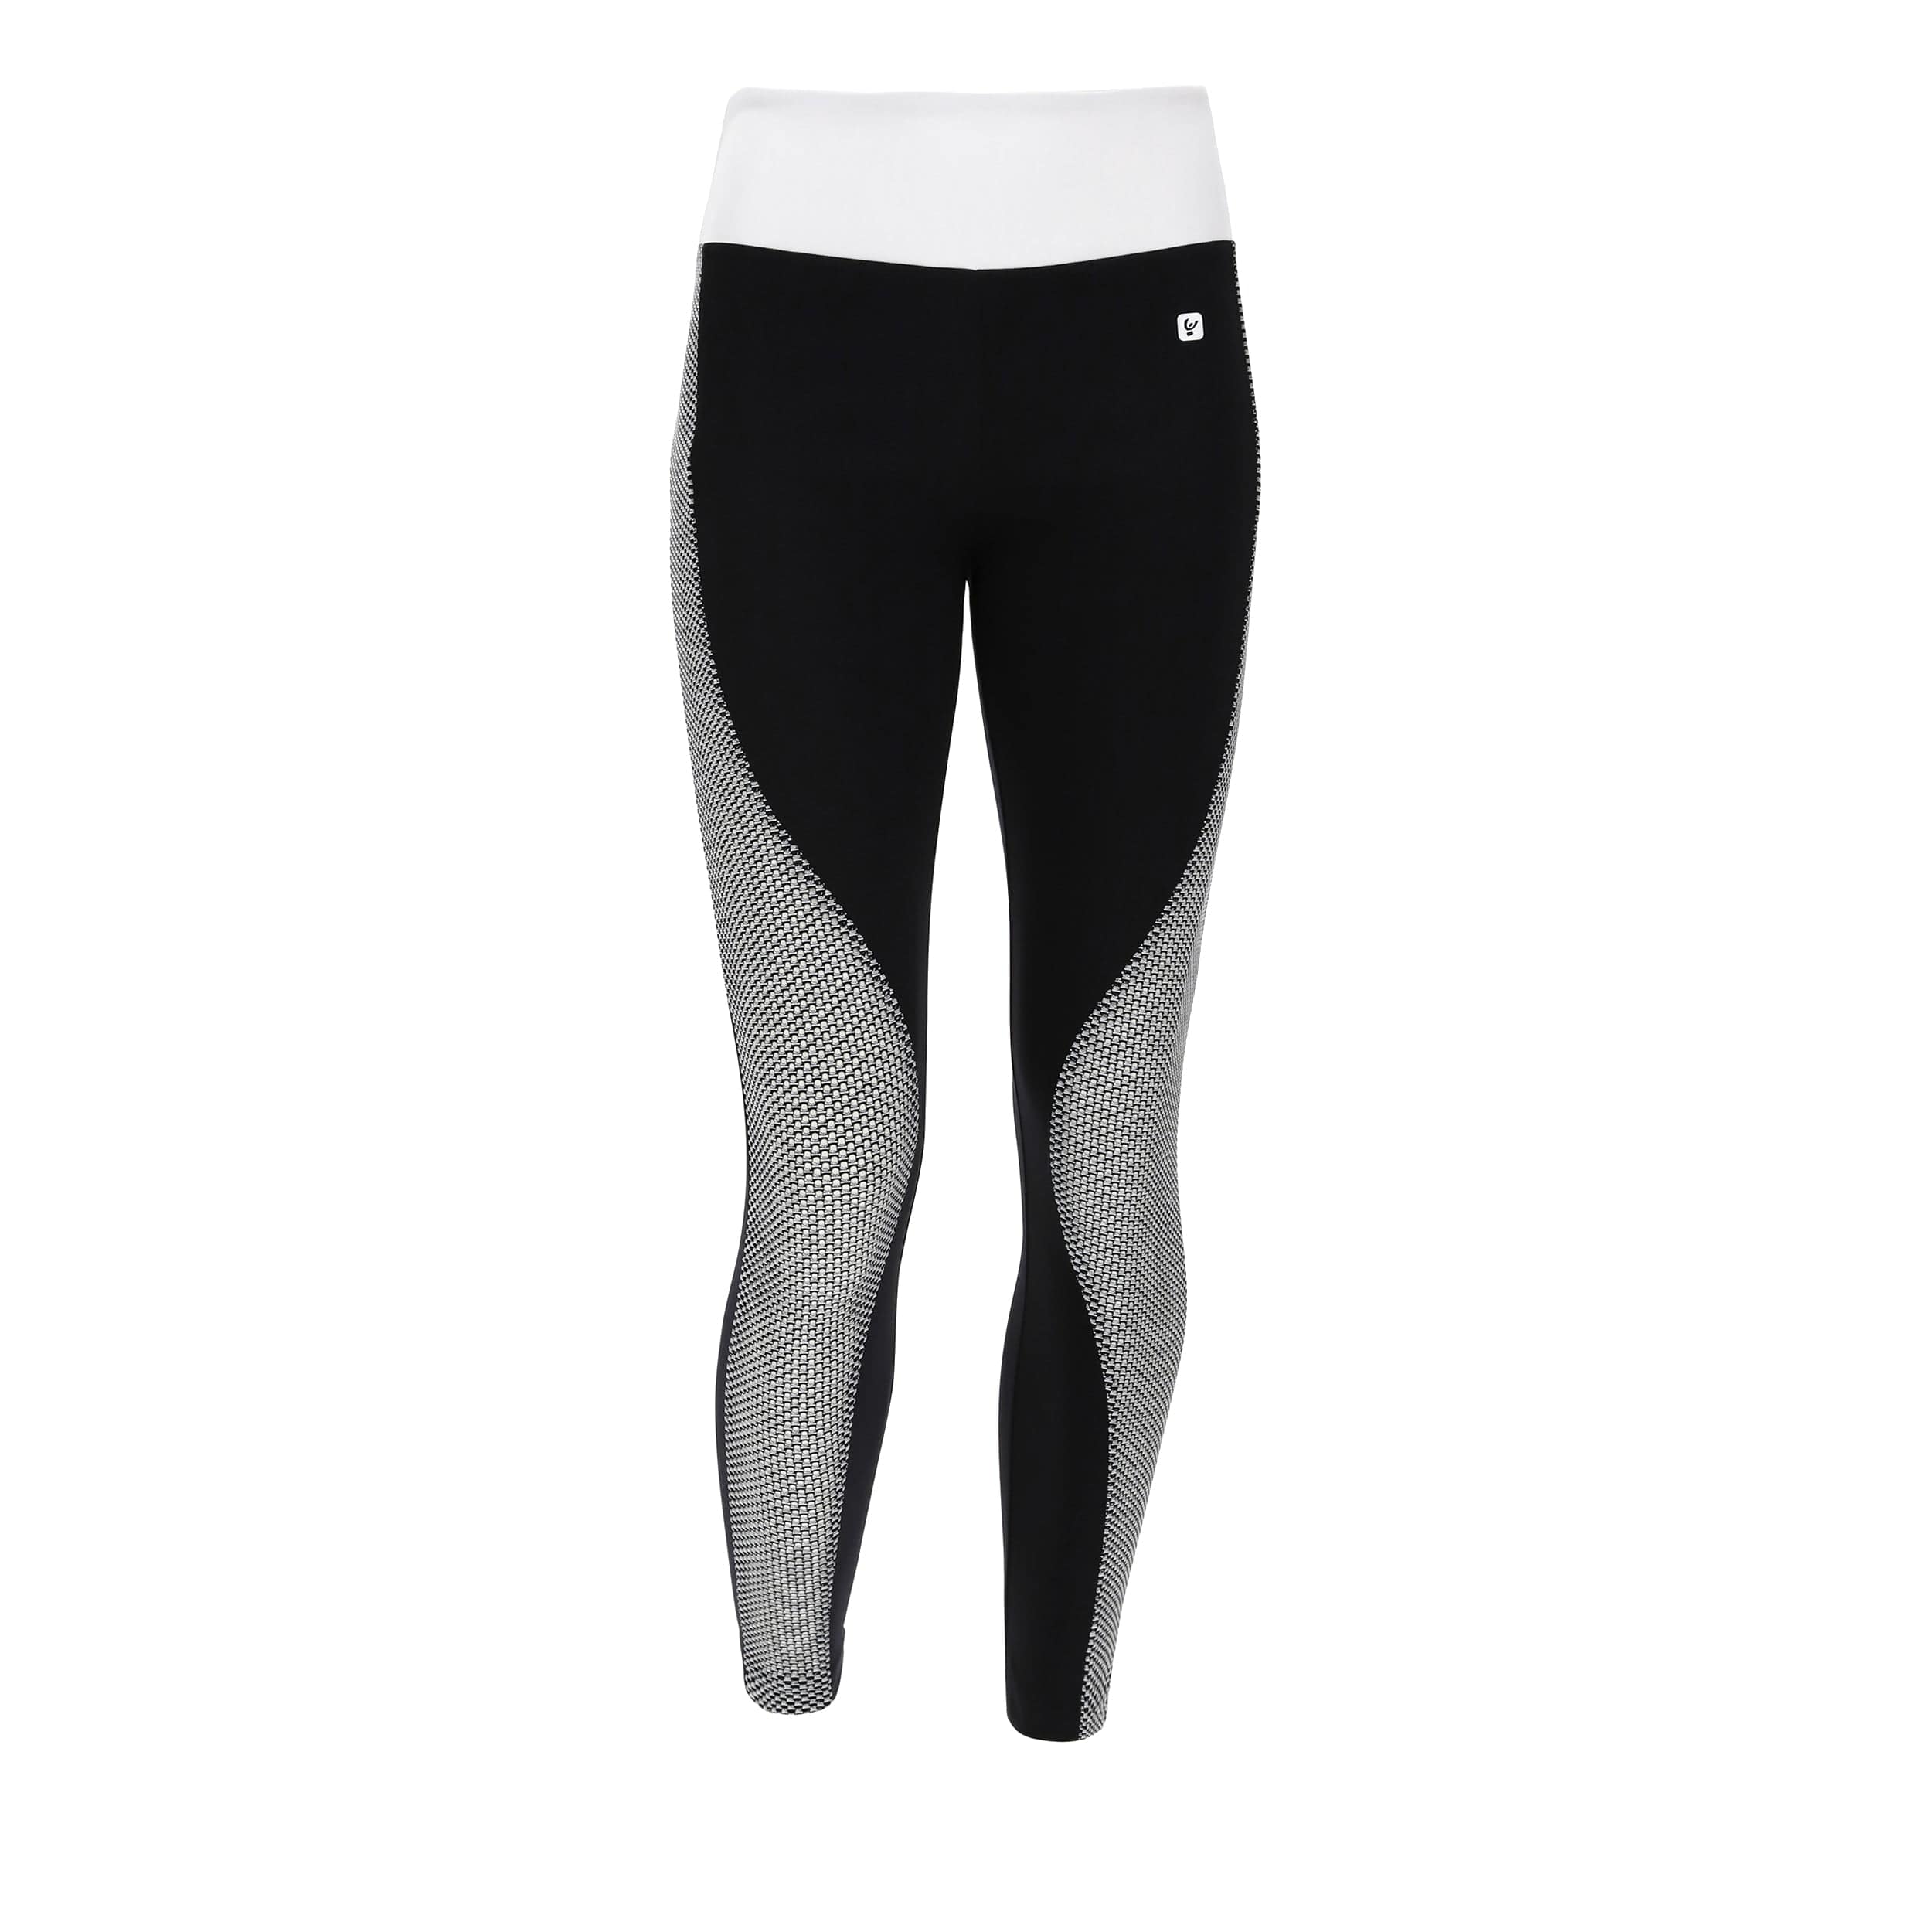 SuperFit Activewear - Mid Rise - 7/8 Length - Black + White Pattern 2